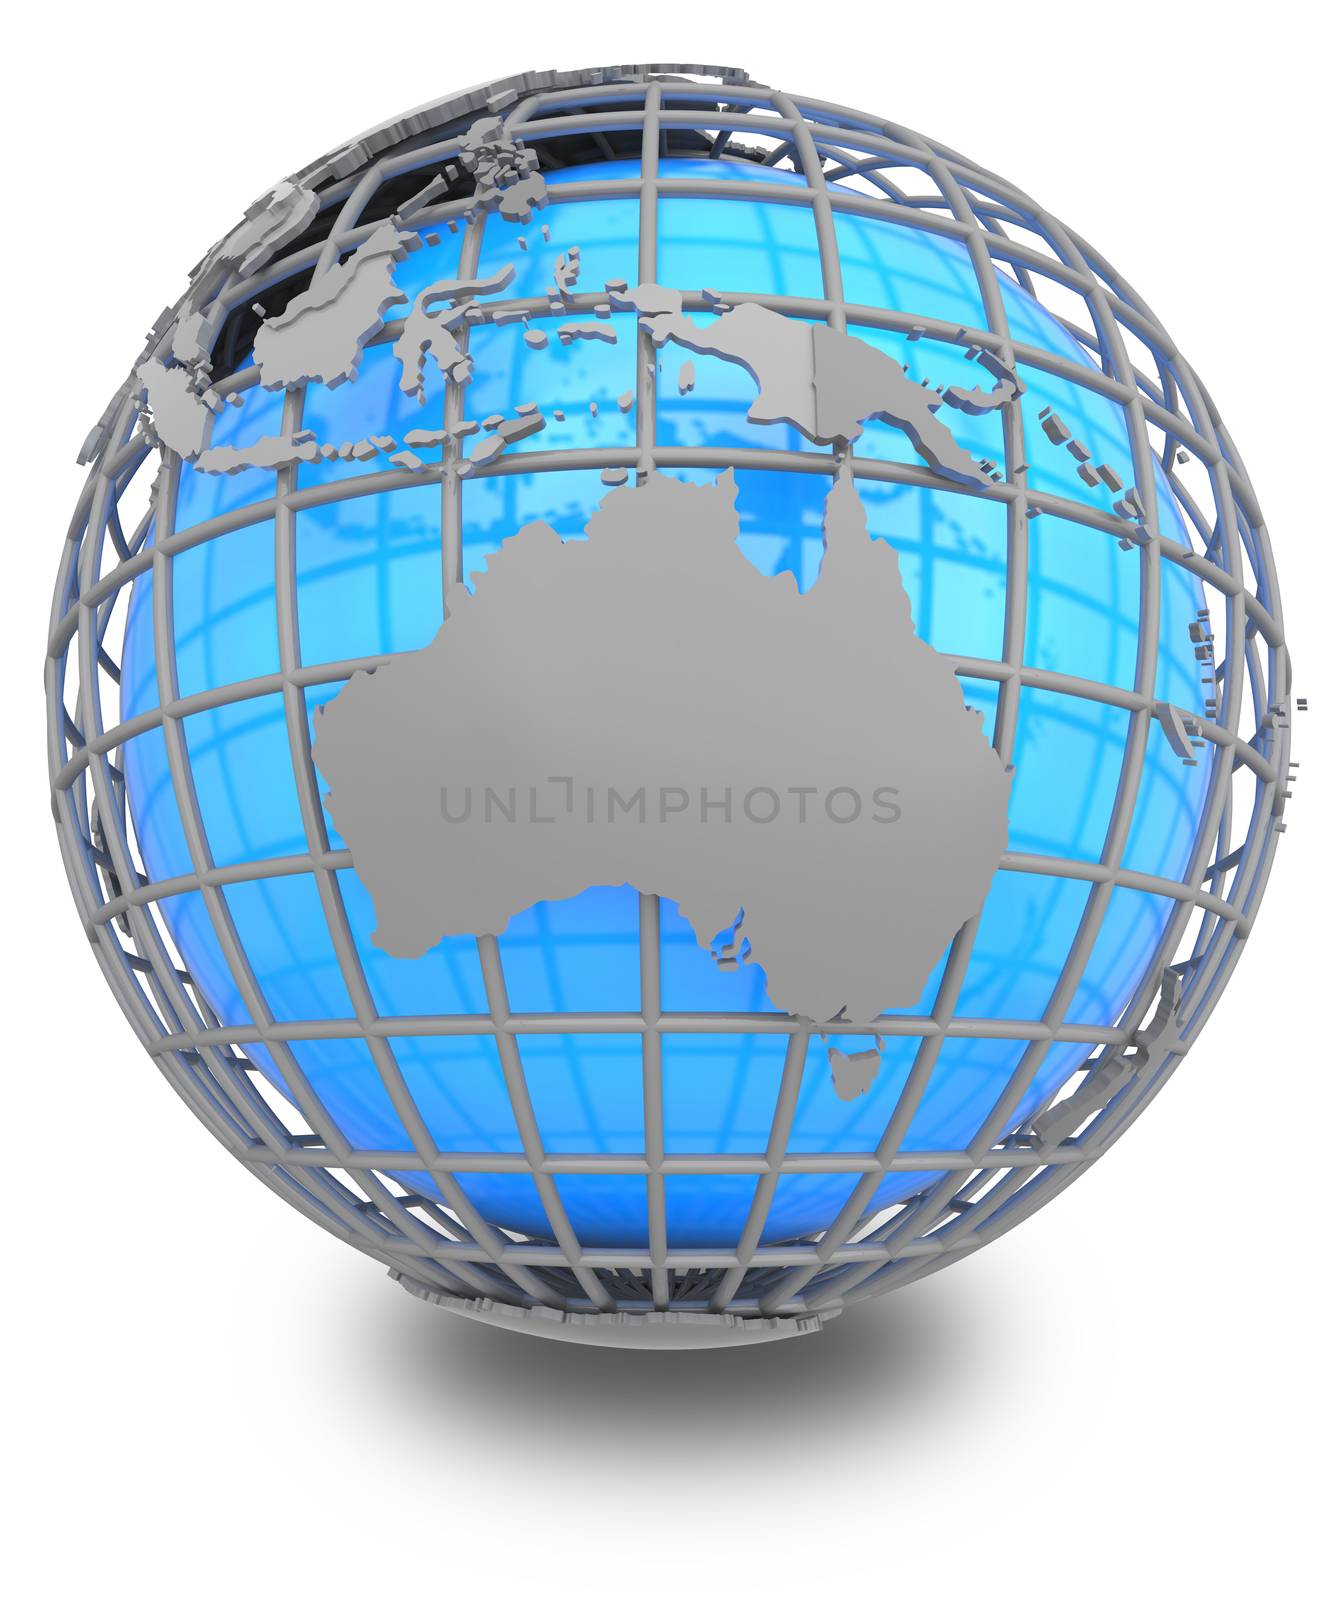 Australia on a grey geographic net enveloping Earth, isolated on white background.